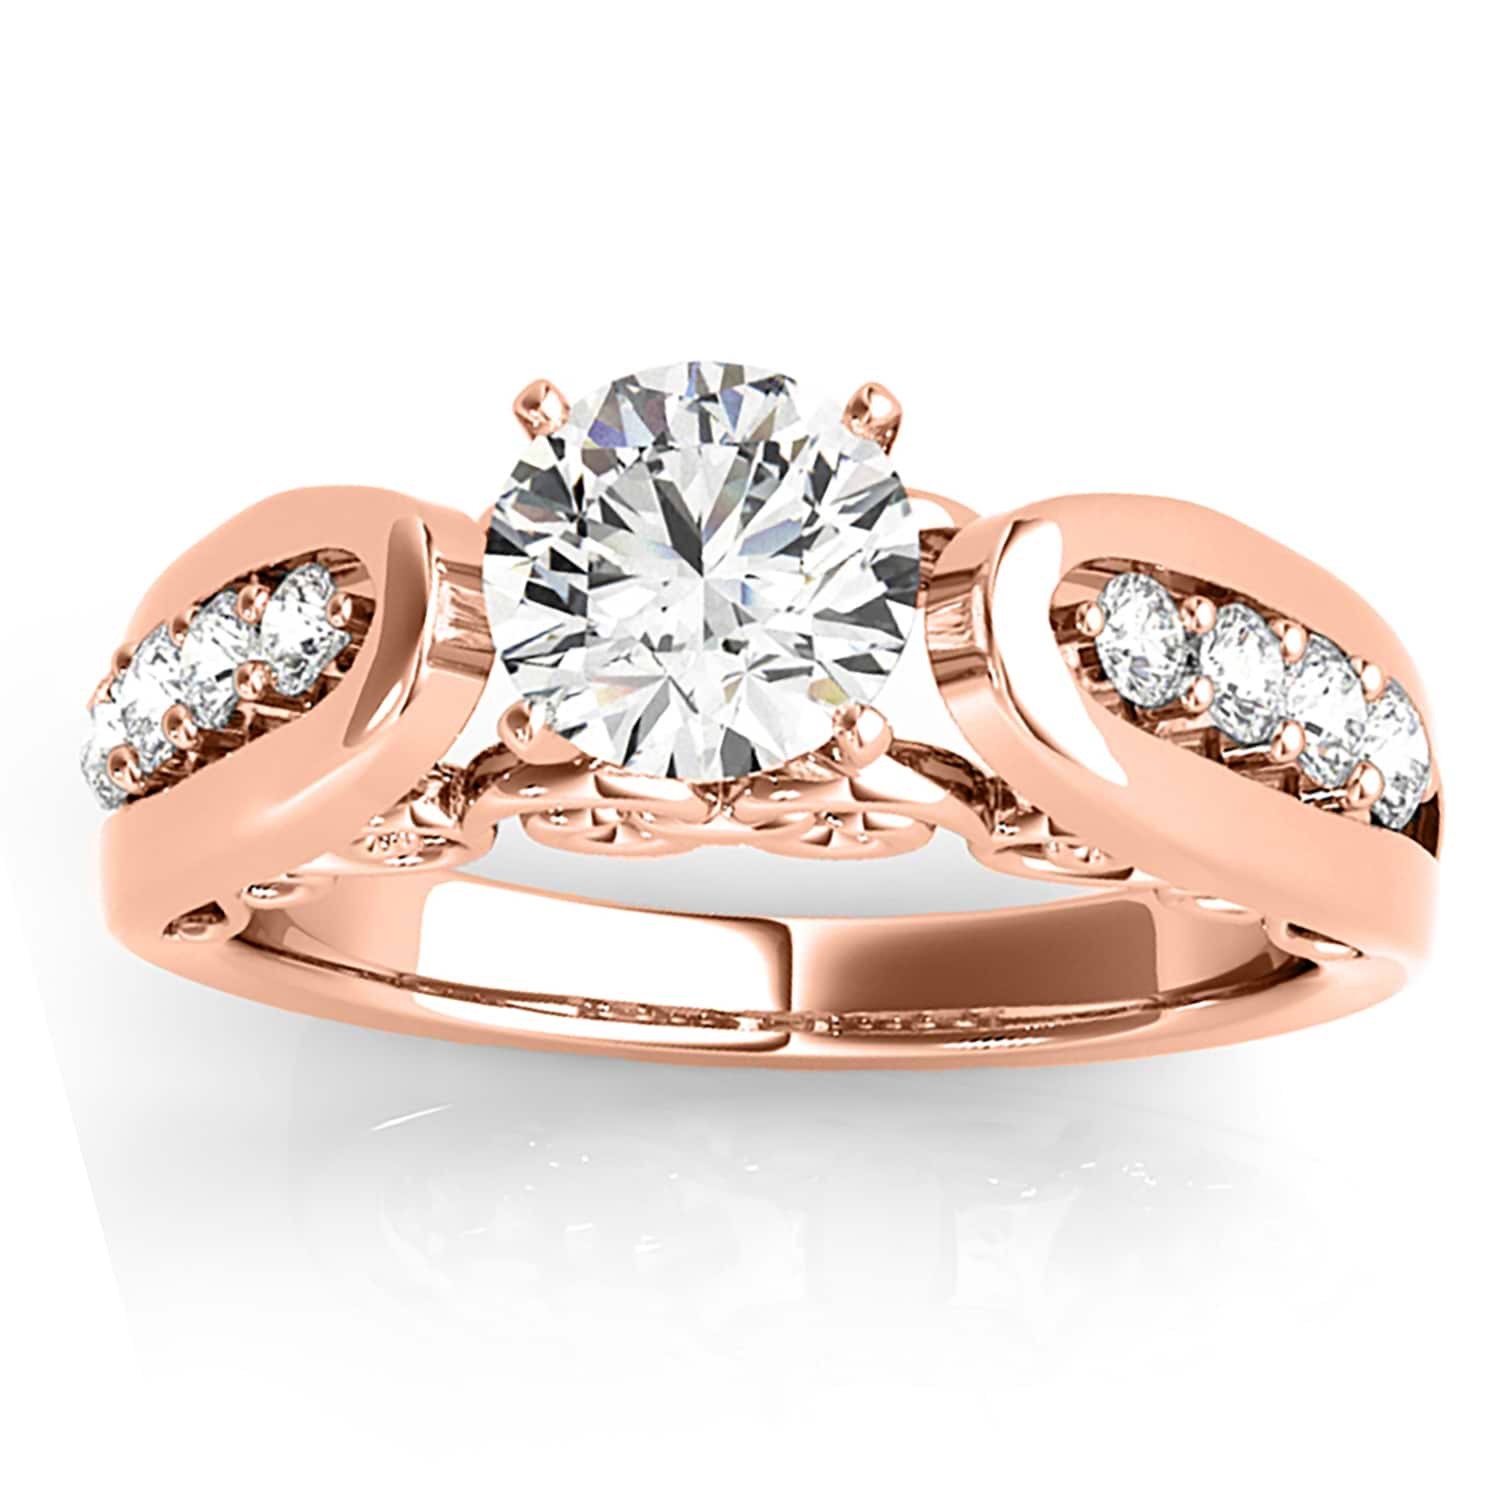 Diamond Accented Single Row Engagement Ring Setting 18k Rose Gold (0.20ct)